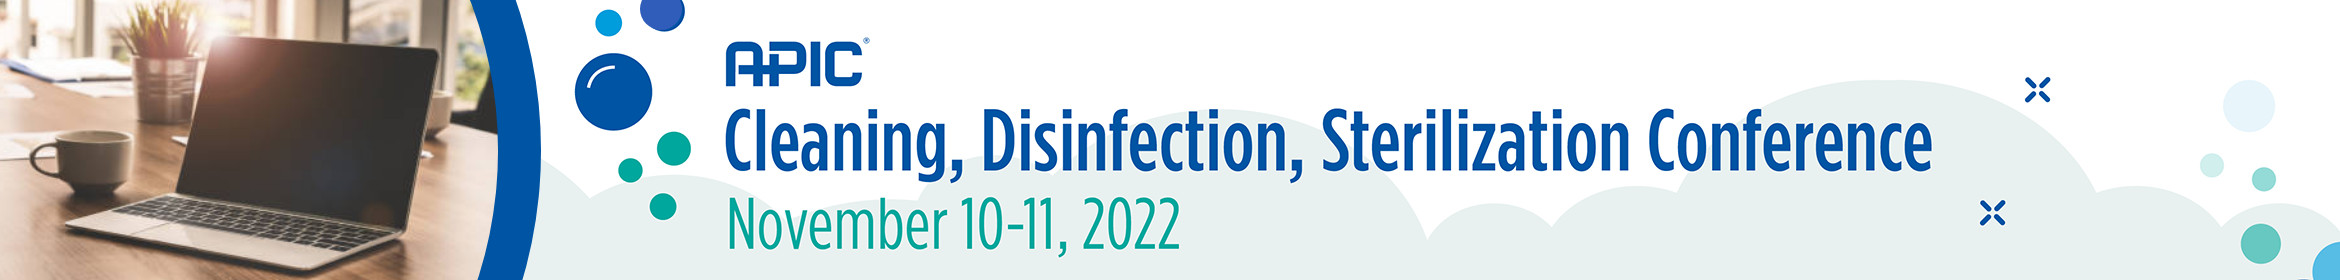 2022 Cleaning, Disinfection & Sterilization Confer Main banner